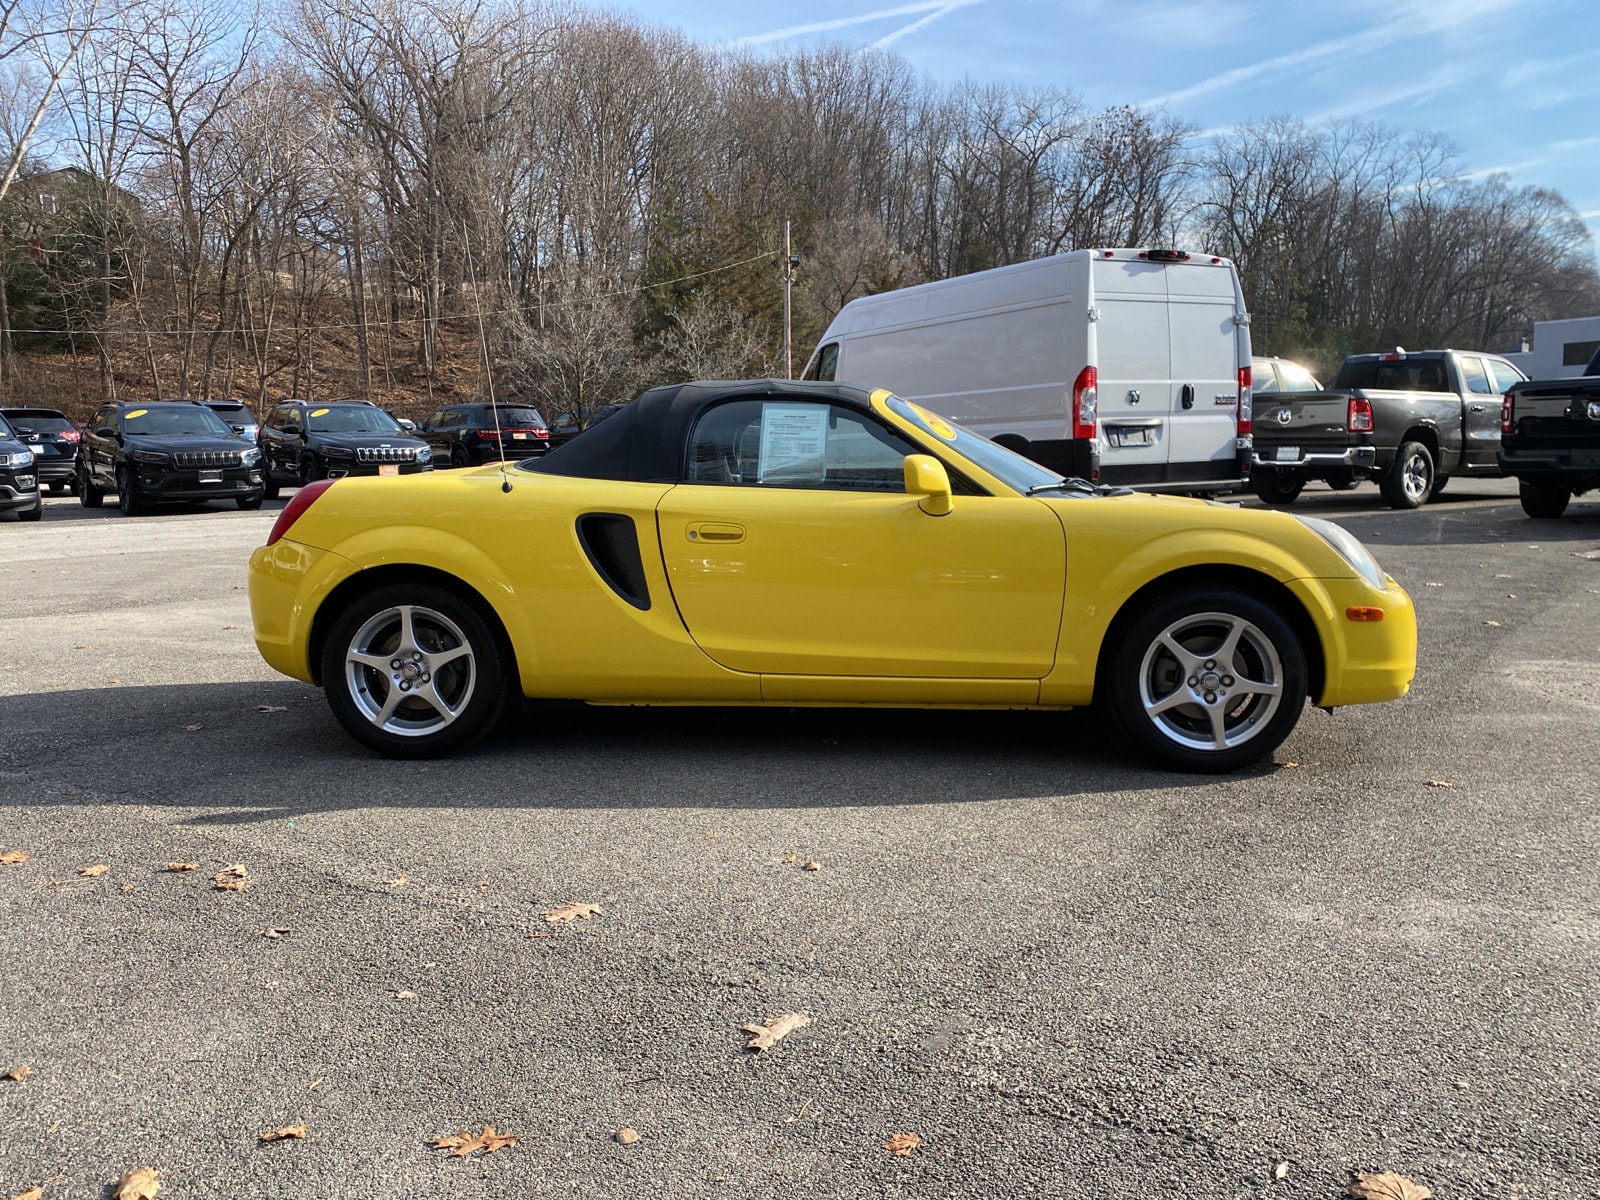 Used 2002 Toyota MR2 Spyder  with VIN JTDFR320620050869 for sale in Croton-on-hudson, NY